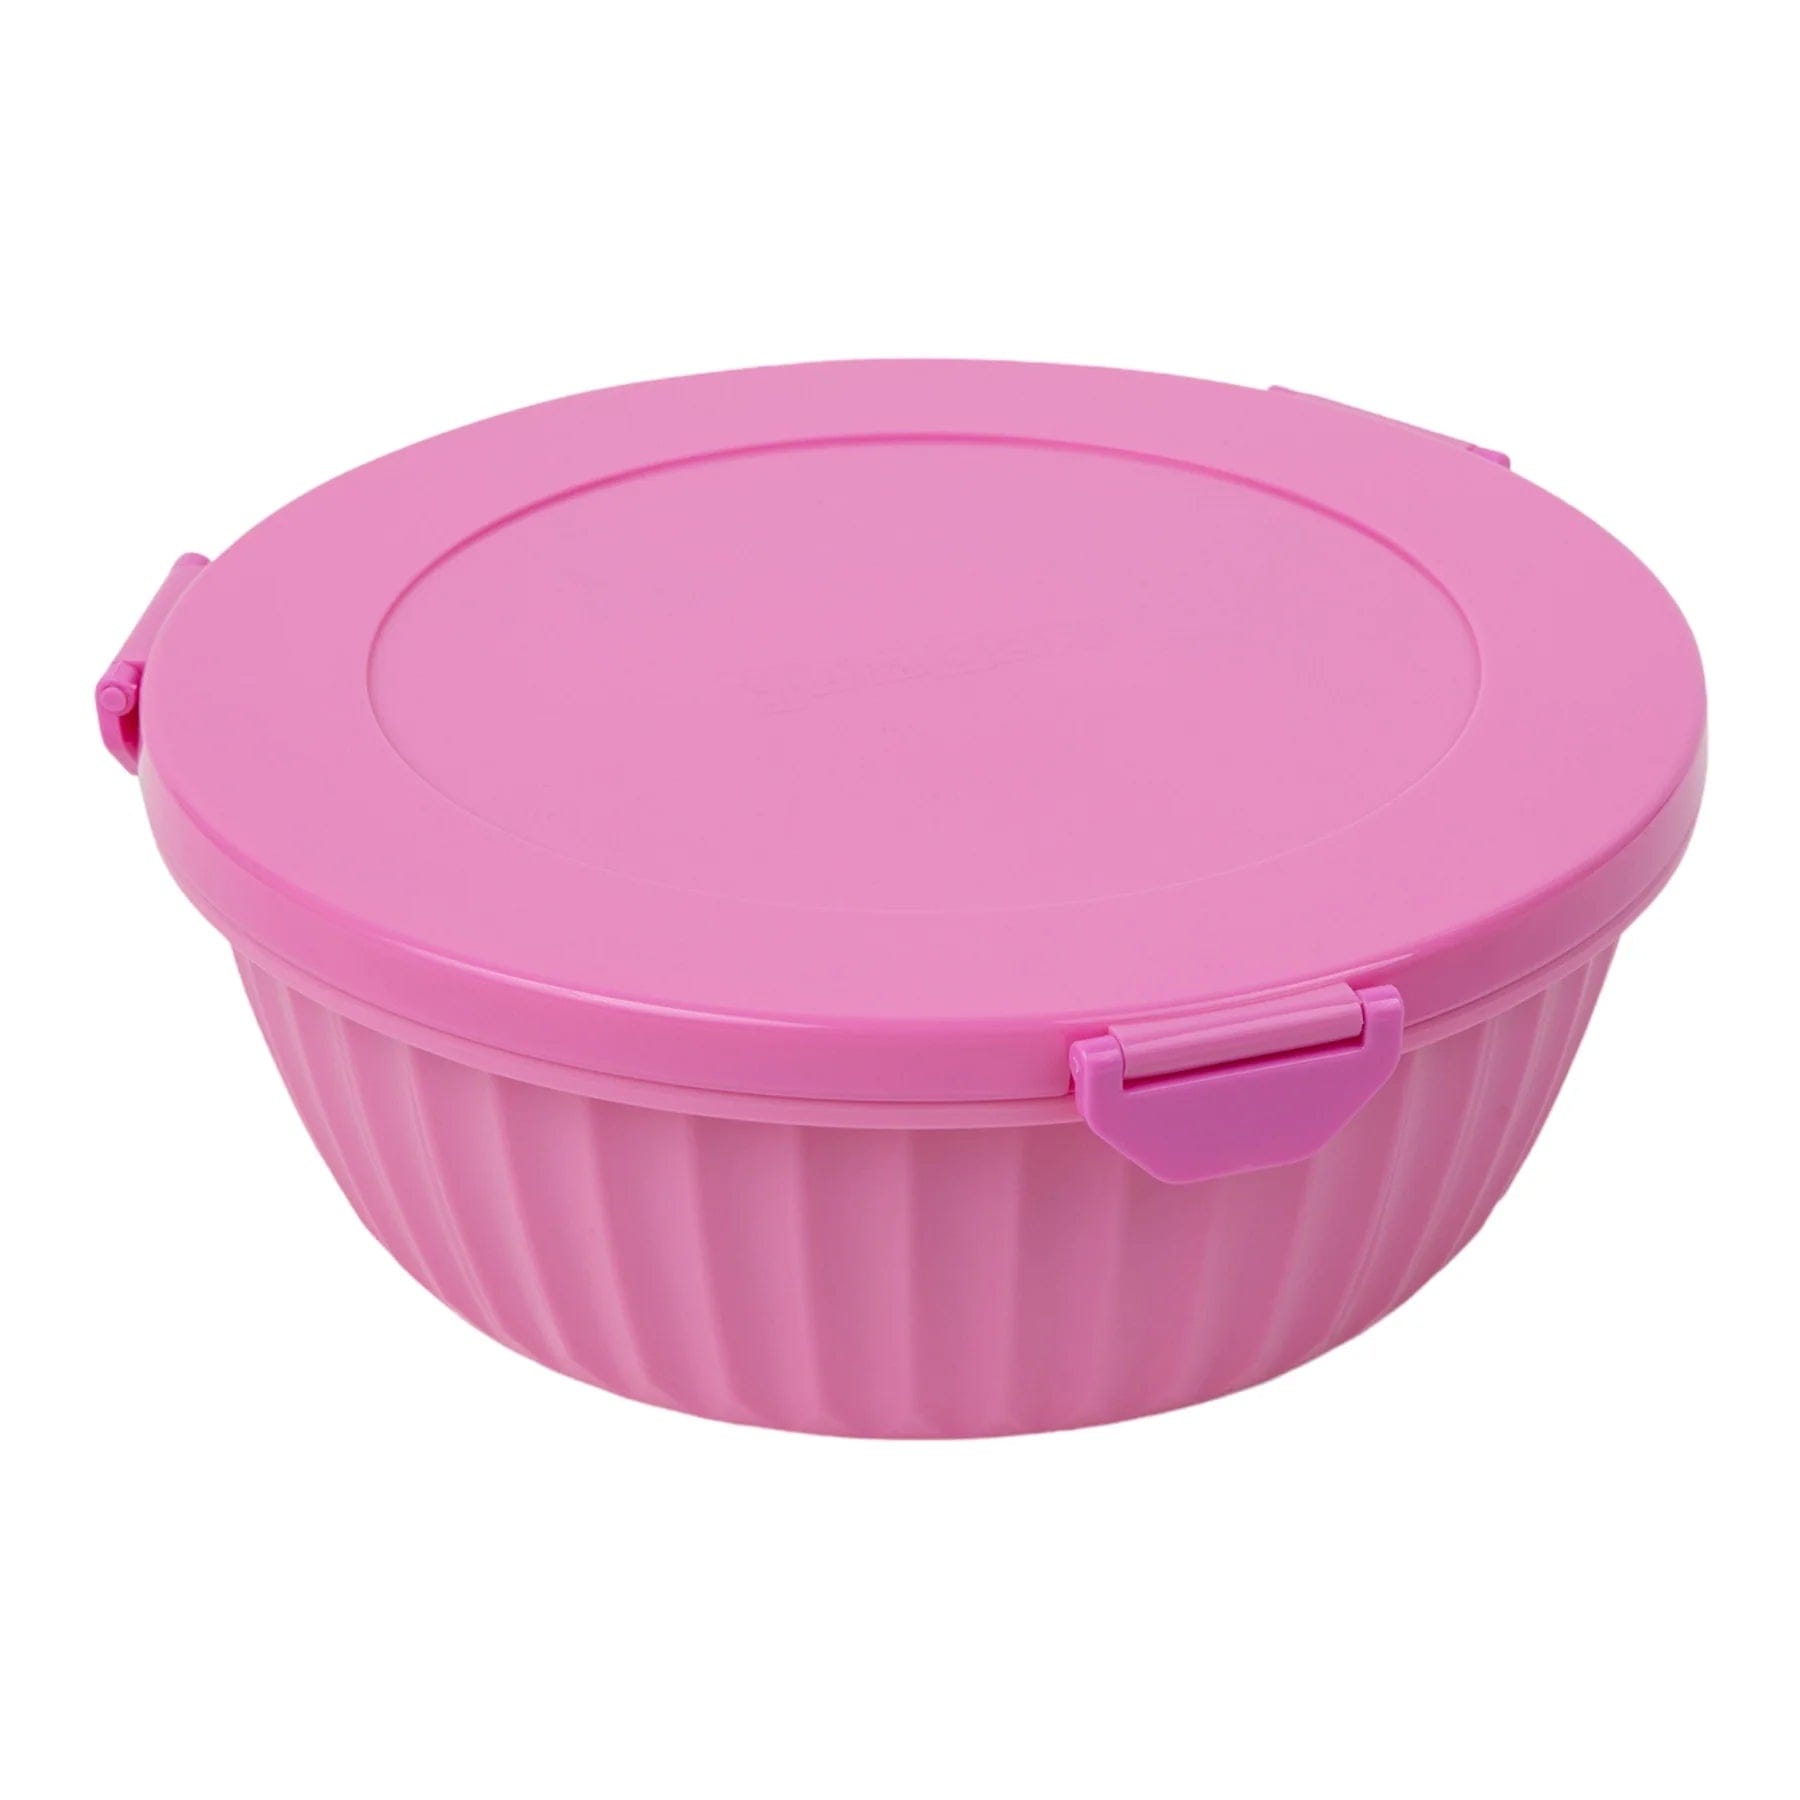 Yumbox Poke Bowl - 3 Compartment Guava Pink